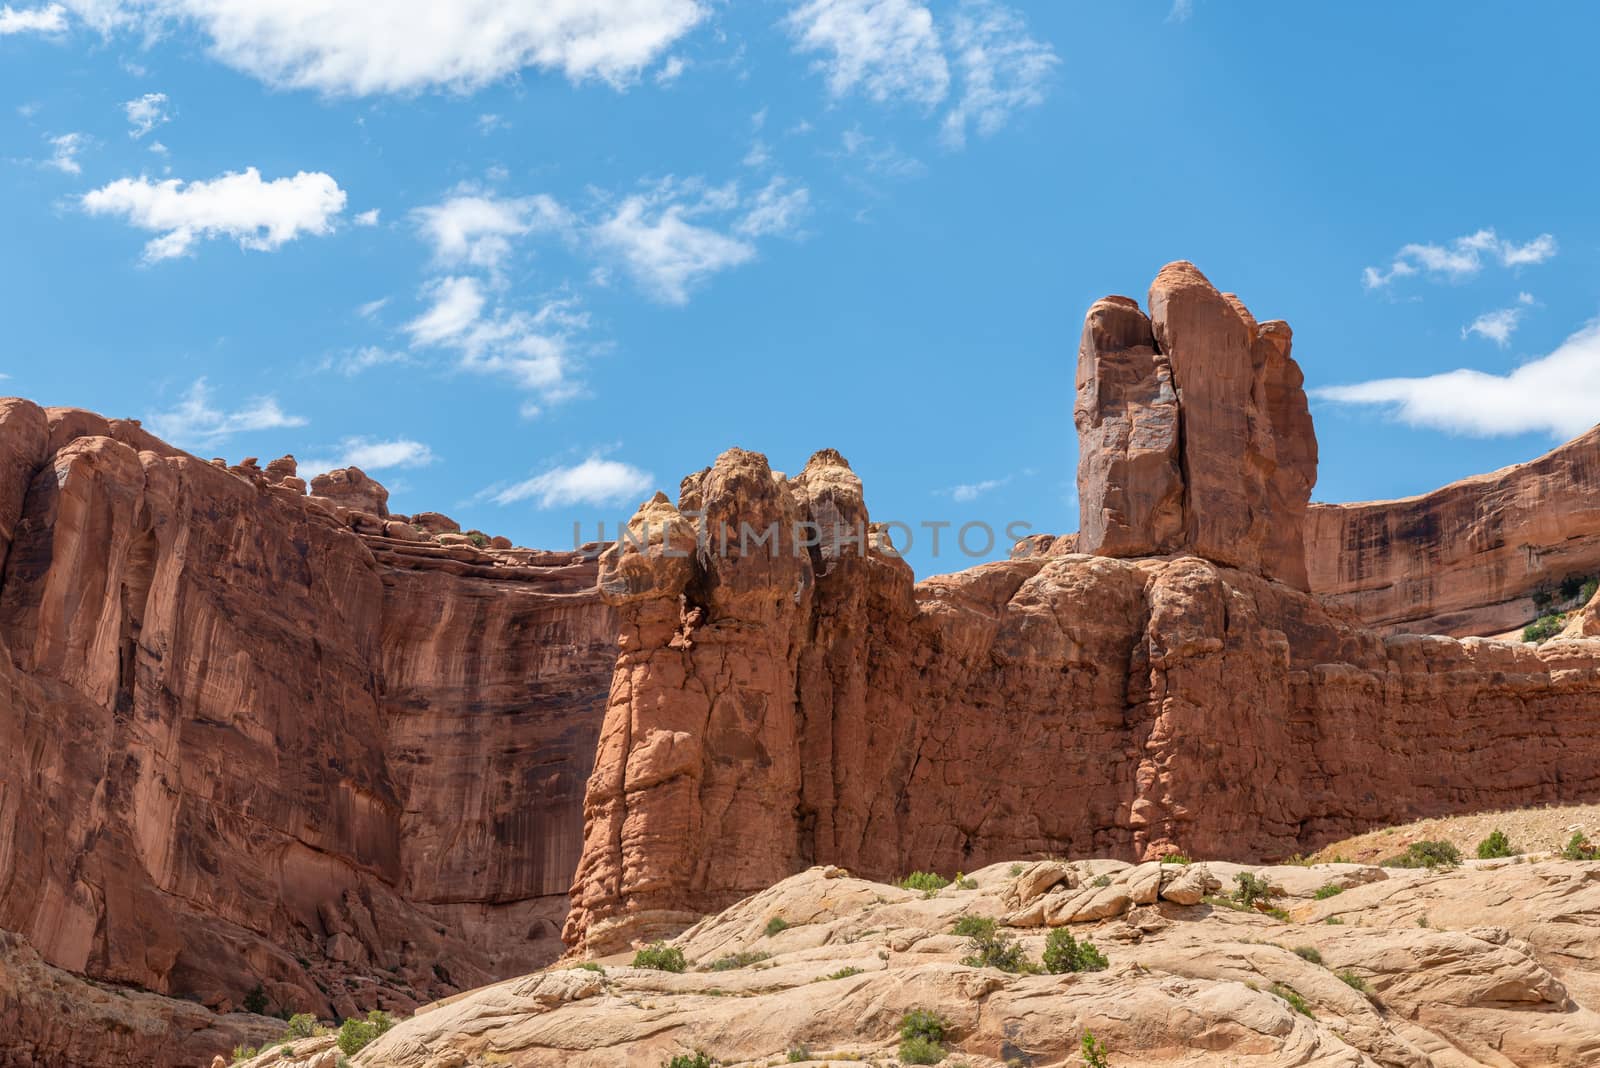 Sandstone formations at the entrance of Arches National Park, Utah by Njean